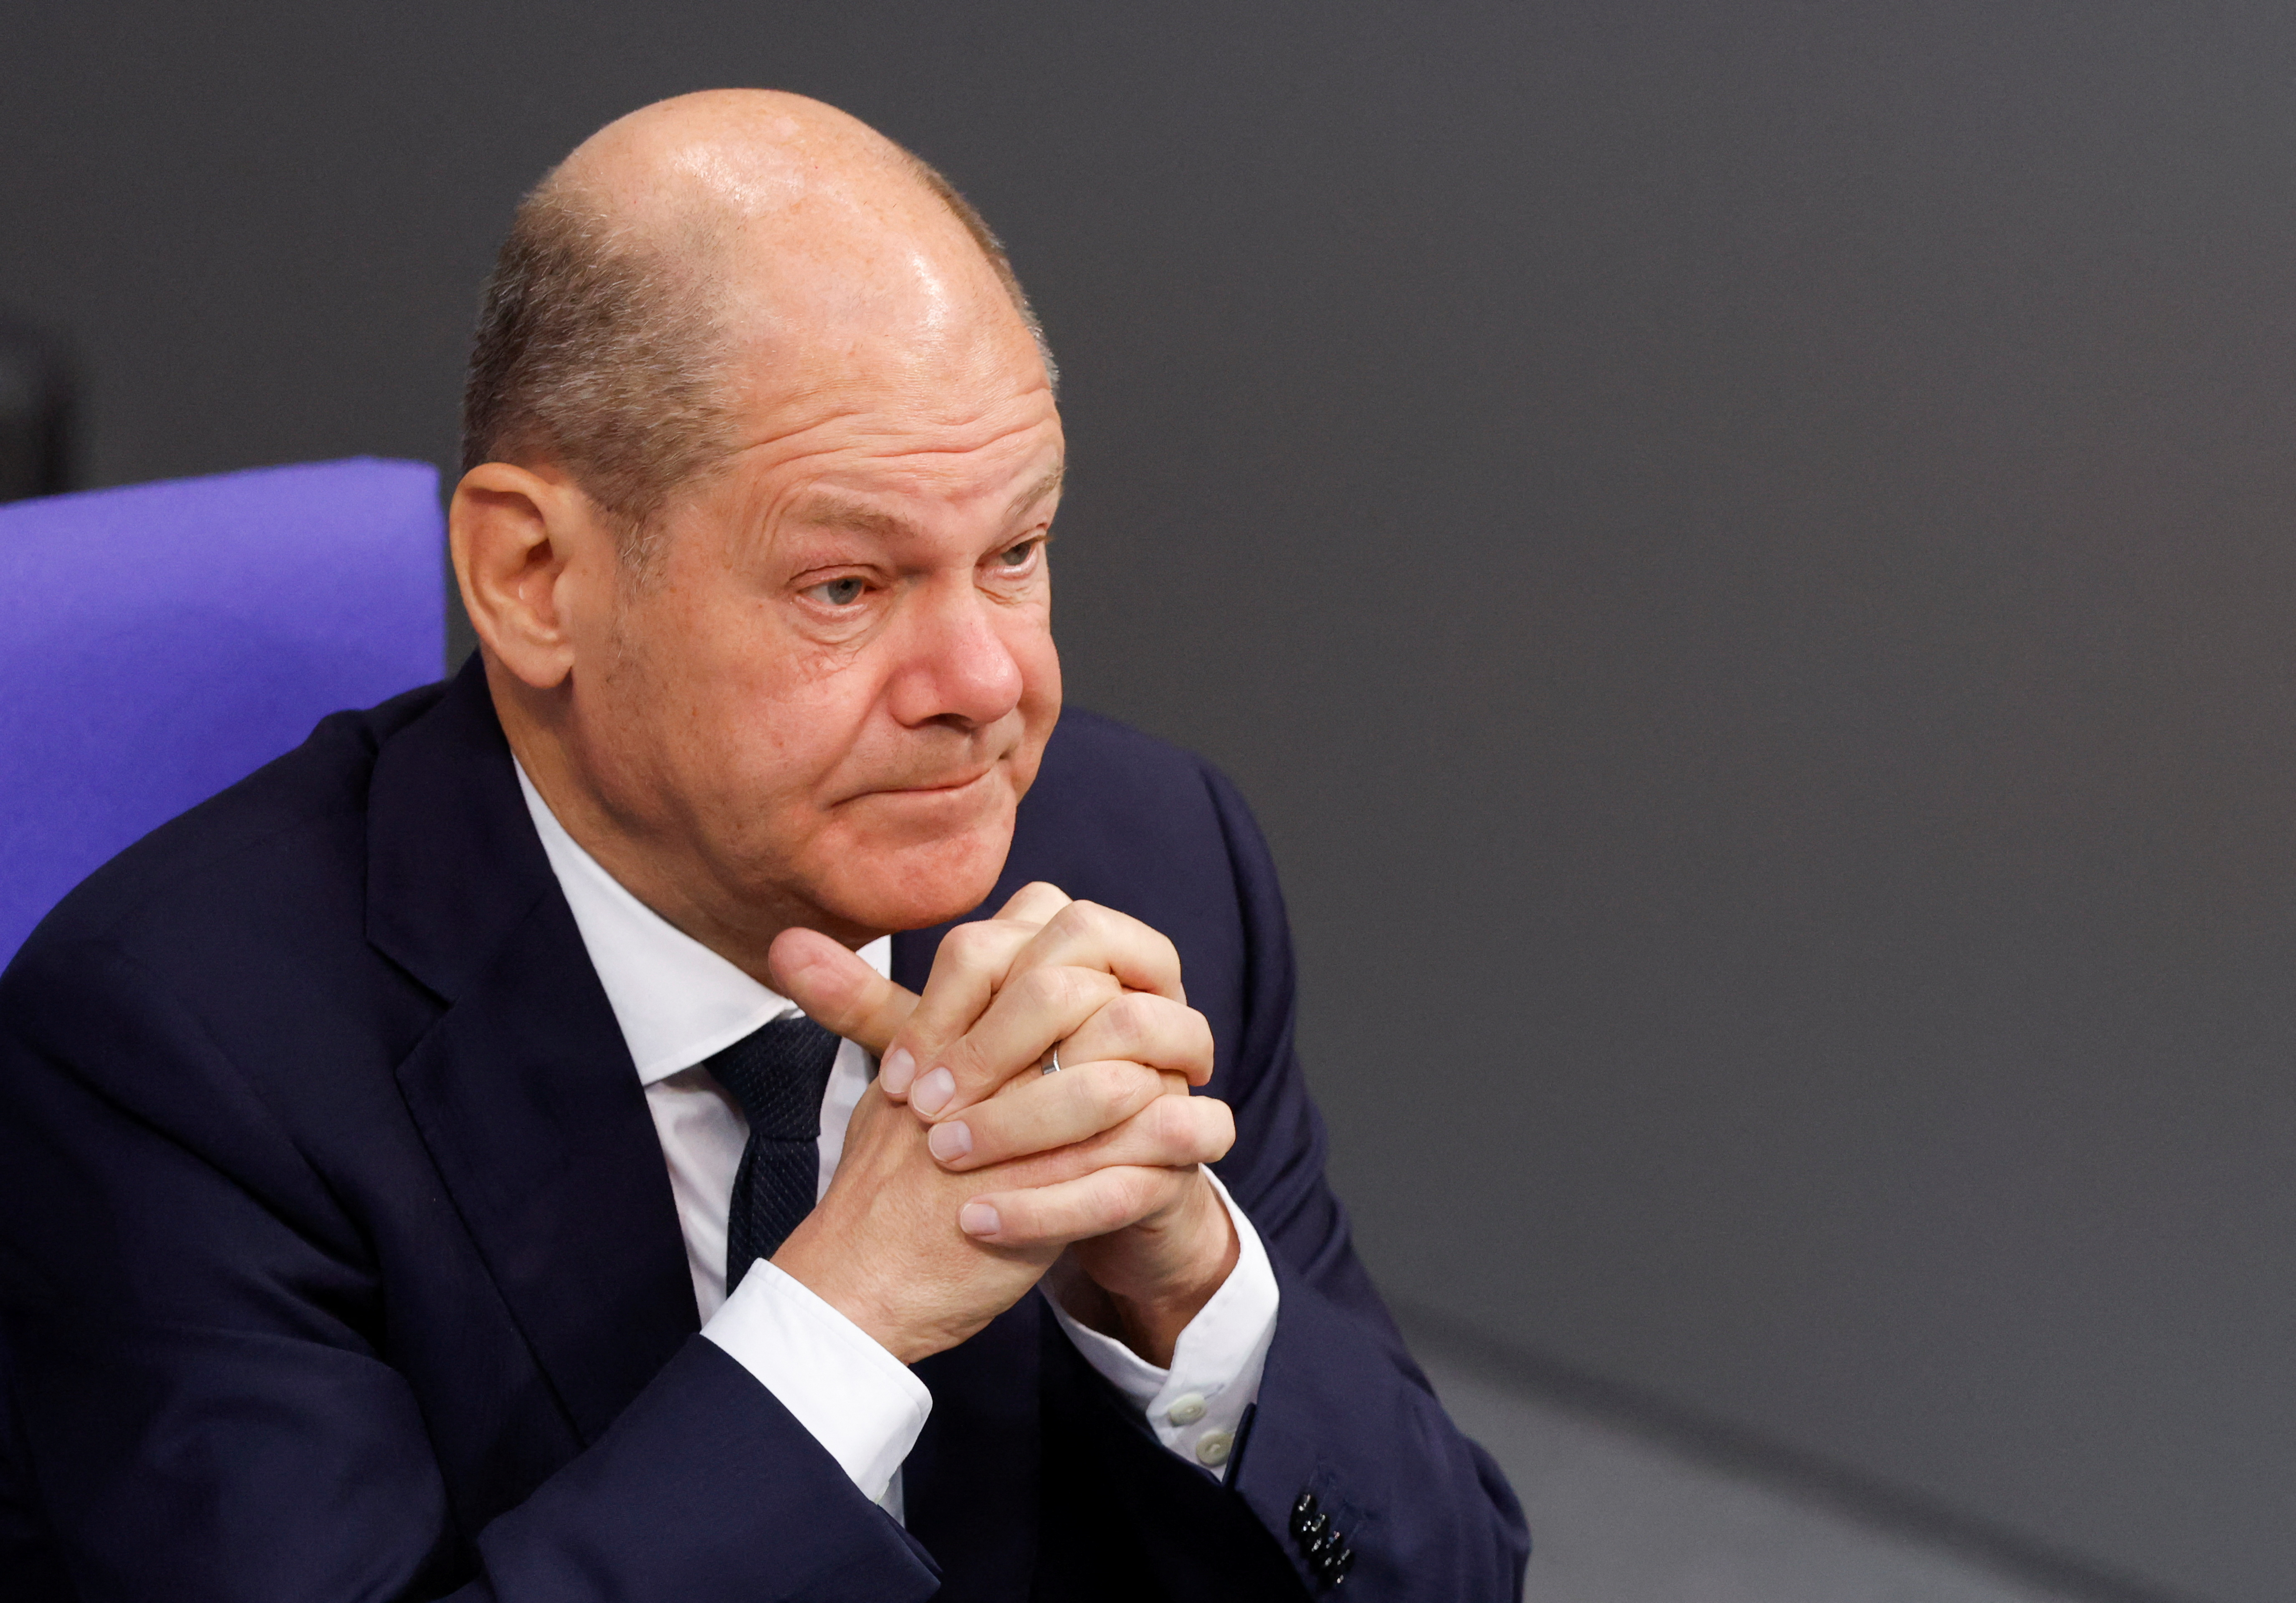 Diversification is underway, Scholz says as German business warns against hurting China ties